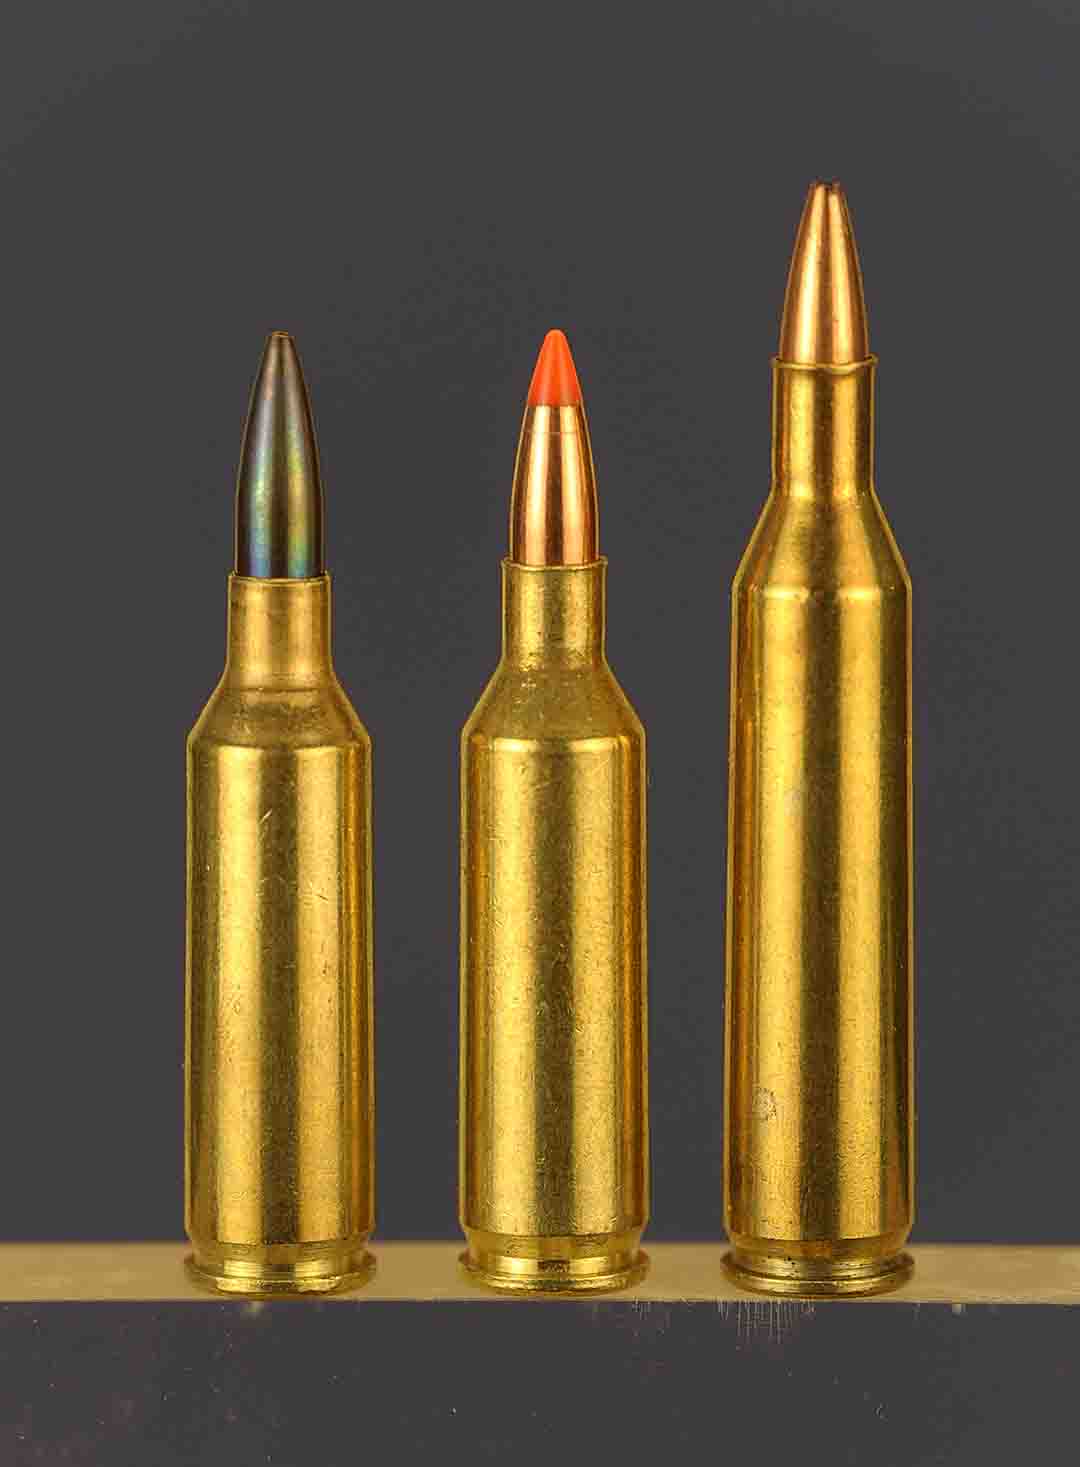 Some of the more popular seventeens out there now. From left to right, we have the .17 MACH IV, the newer .17 Remington Fireball and the original .17 Remington.